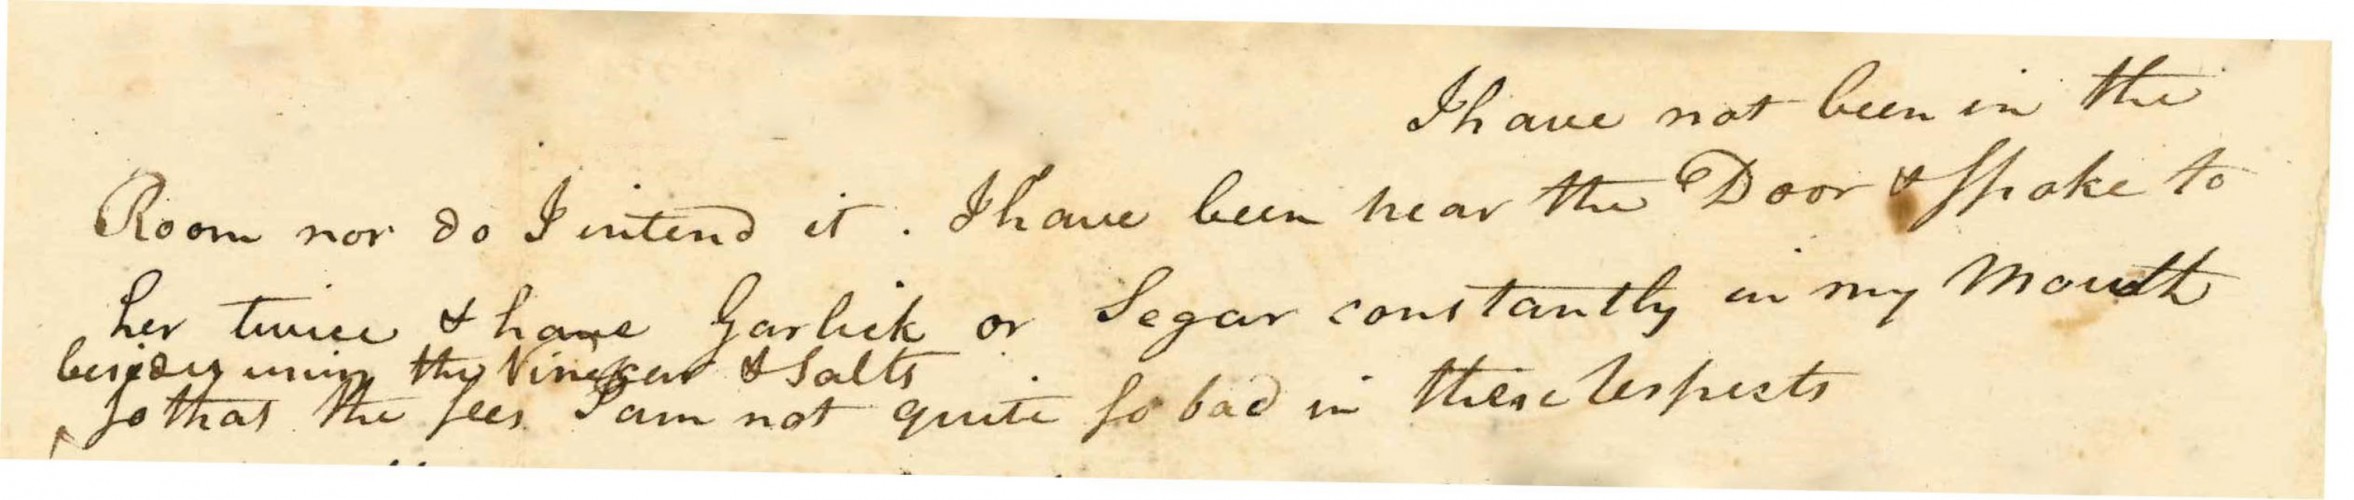 Snippet of the letter 